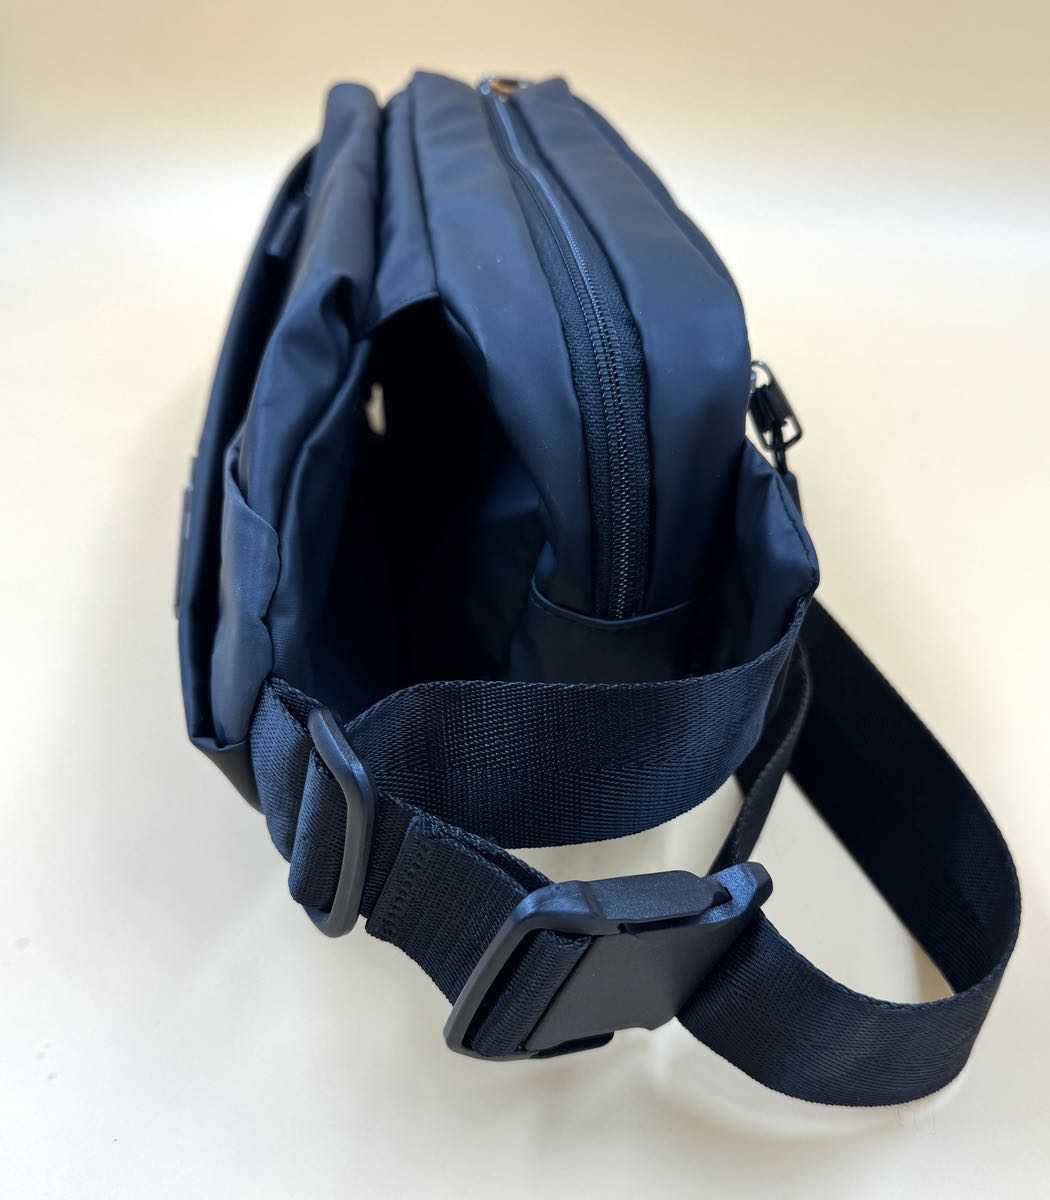 Inateck Sling Bag review - an excellent thing if slings are your thing ...